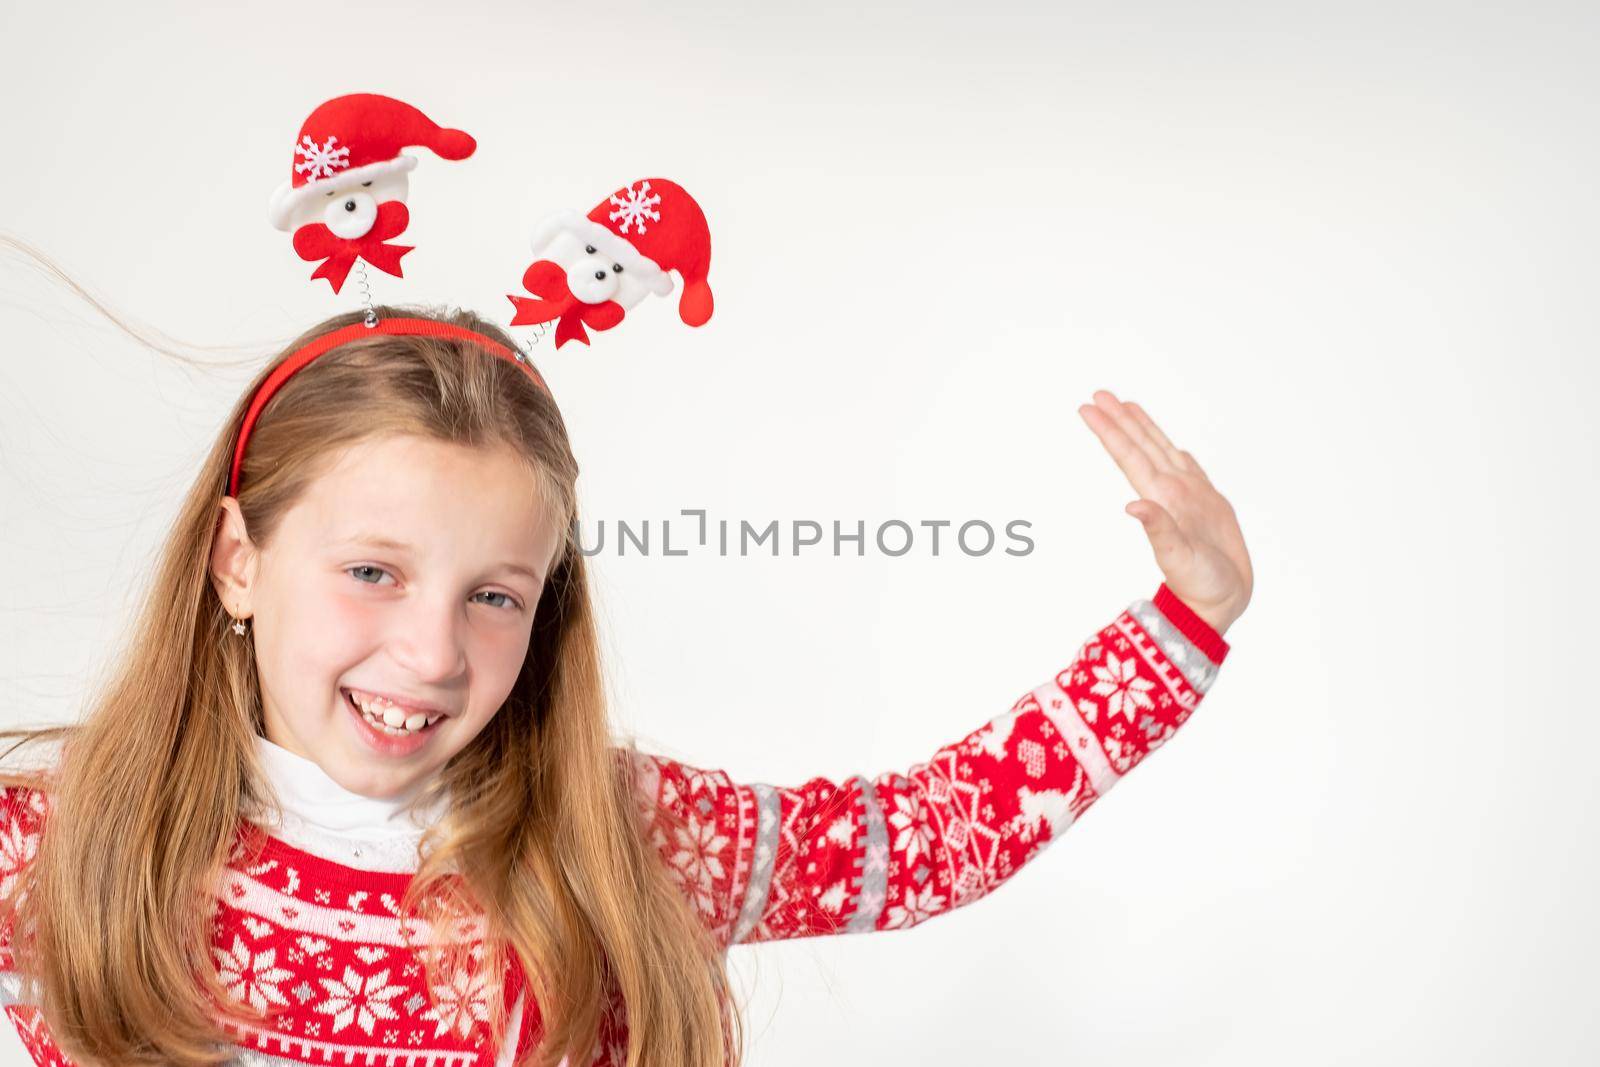 Portrait of excited funny funky schoolchild dancing in christmas costume with headband isolated on white background.Ready For Christmas party.Merry Christmas presents shopping sale concept. by YuliaYaspe1979